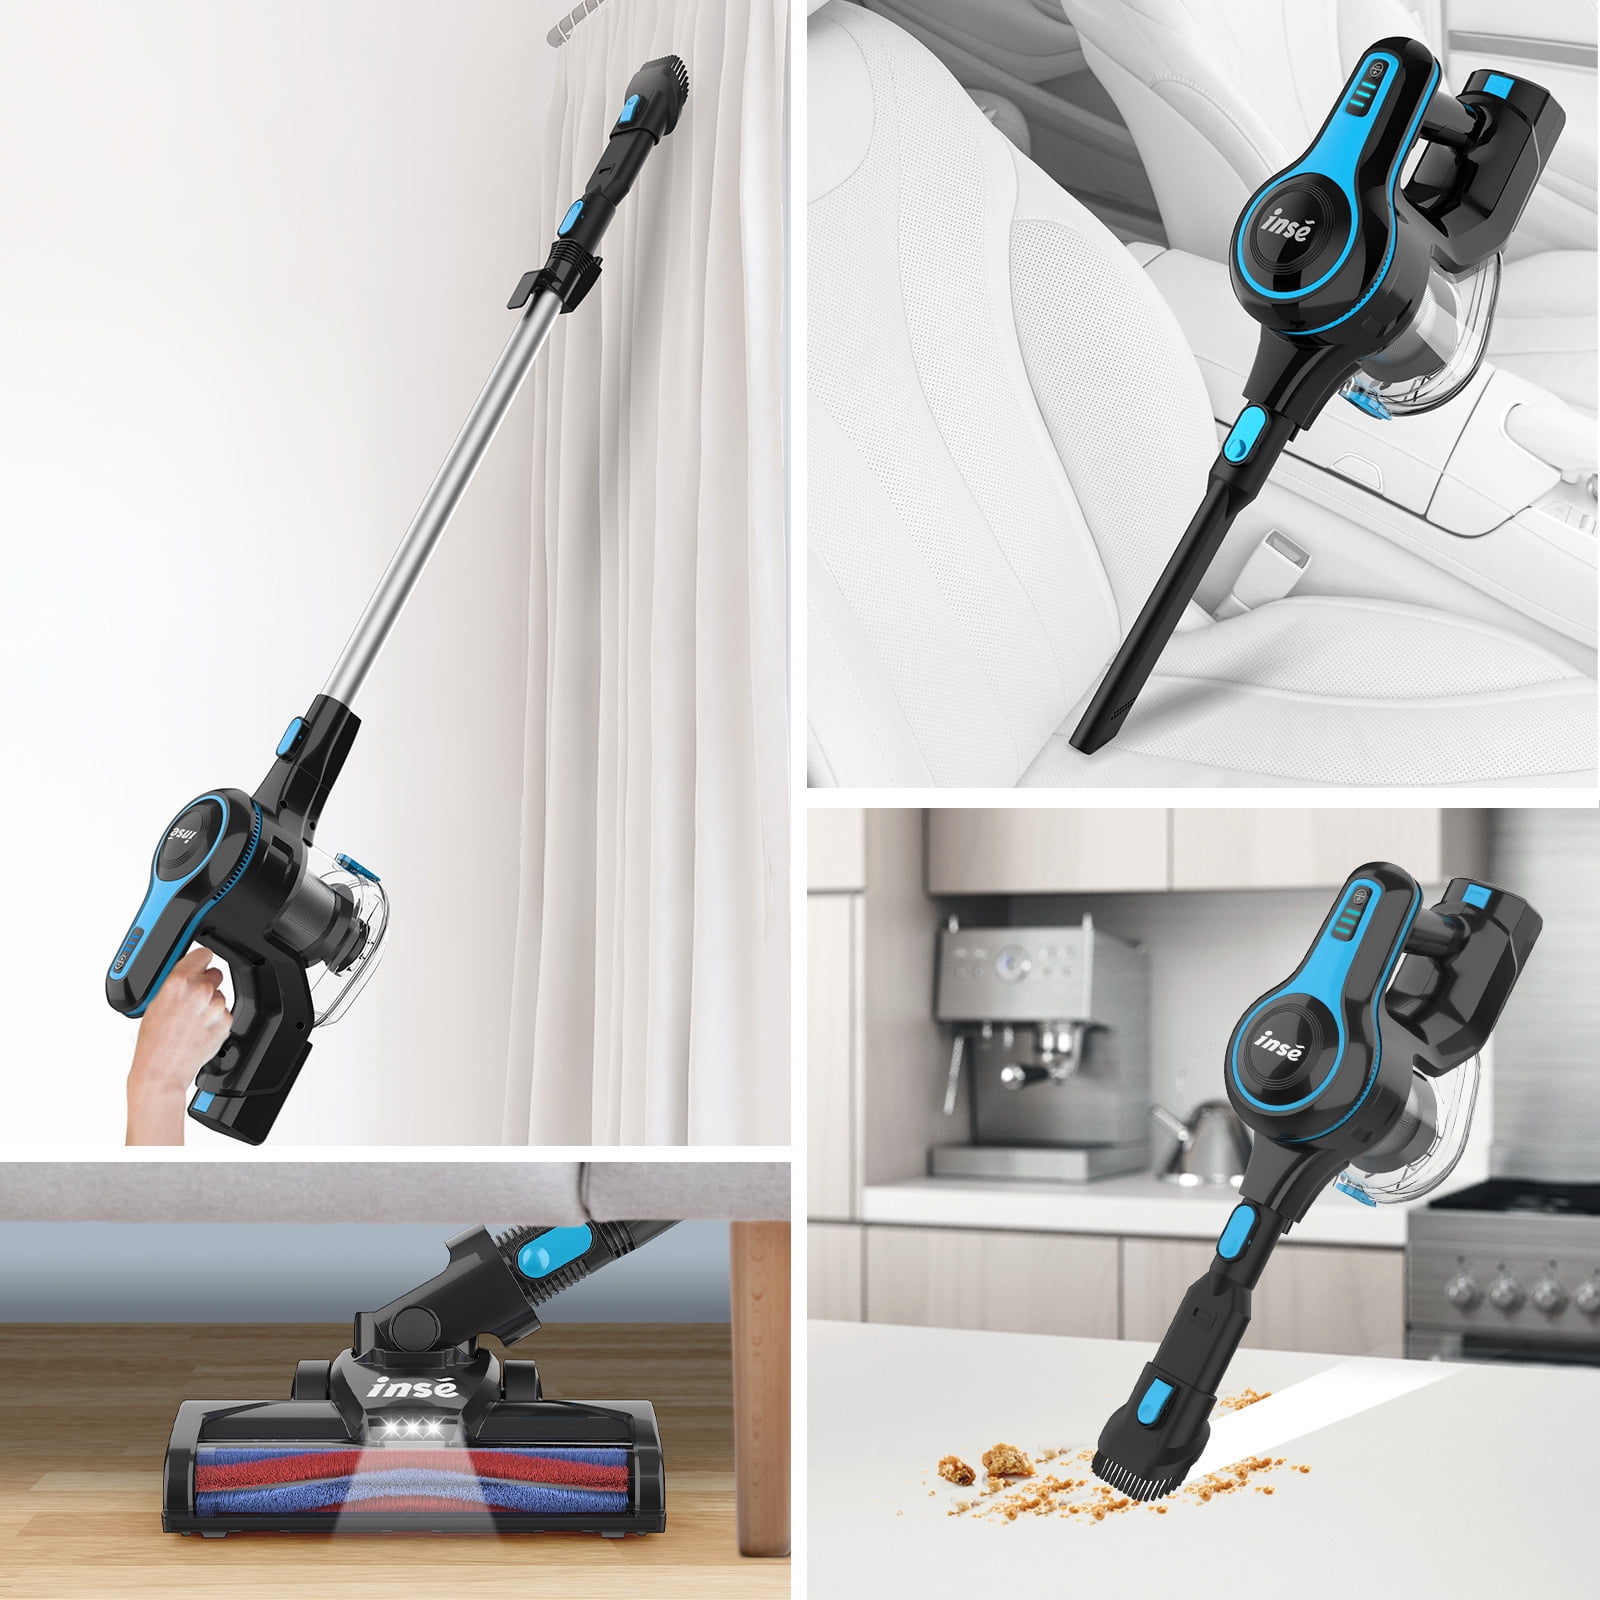 INSE Cordless Vacuum Cleaner, 6 in 1 Powerful Suction Lightweight Stick Vacuum with 2200mAh Rechargeable Battery, up to 45min Runtime, for Home Furniture Hard Floor Carpet Car Hair - 3